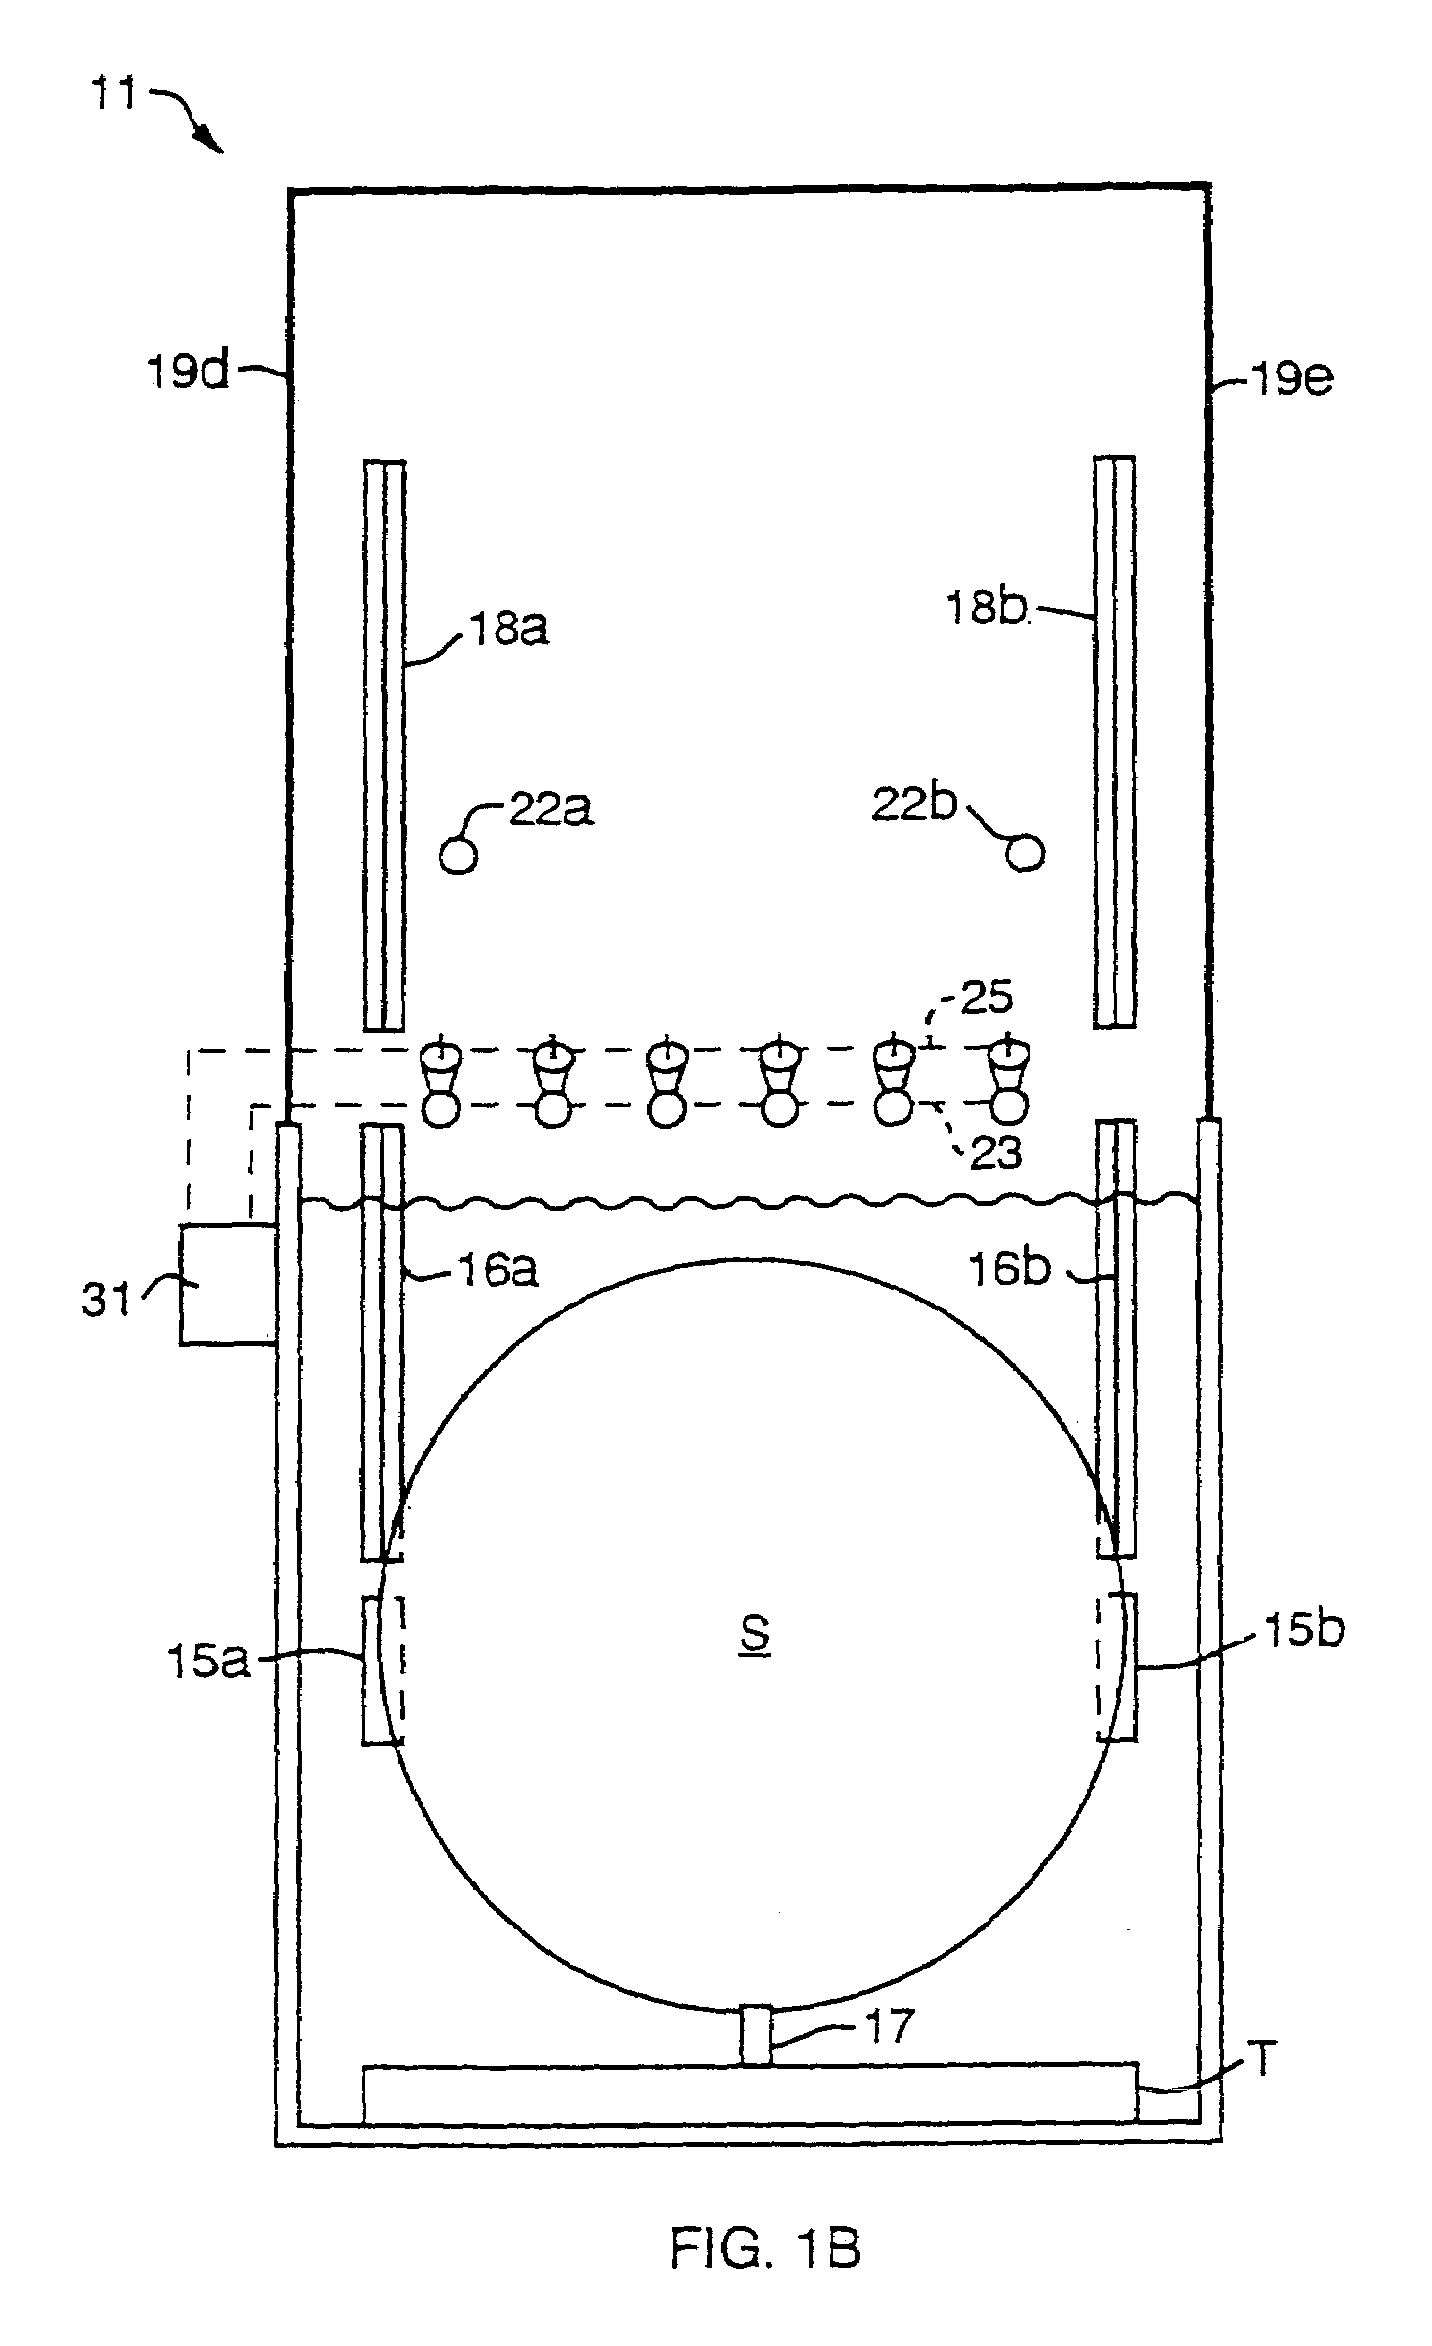 Apparatus for cleaning and drying substrates